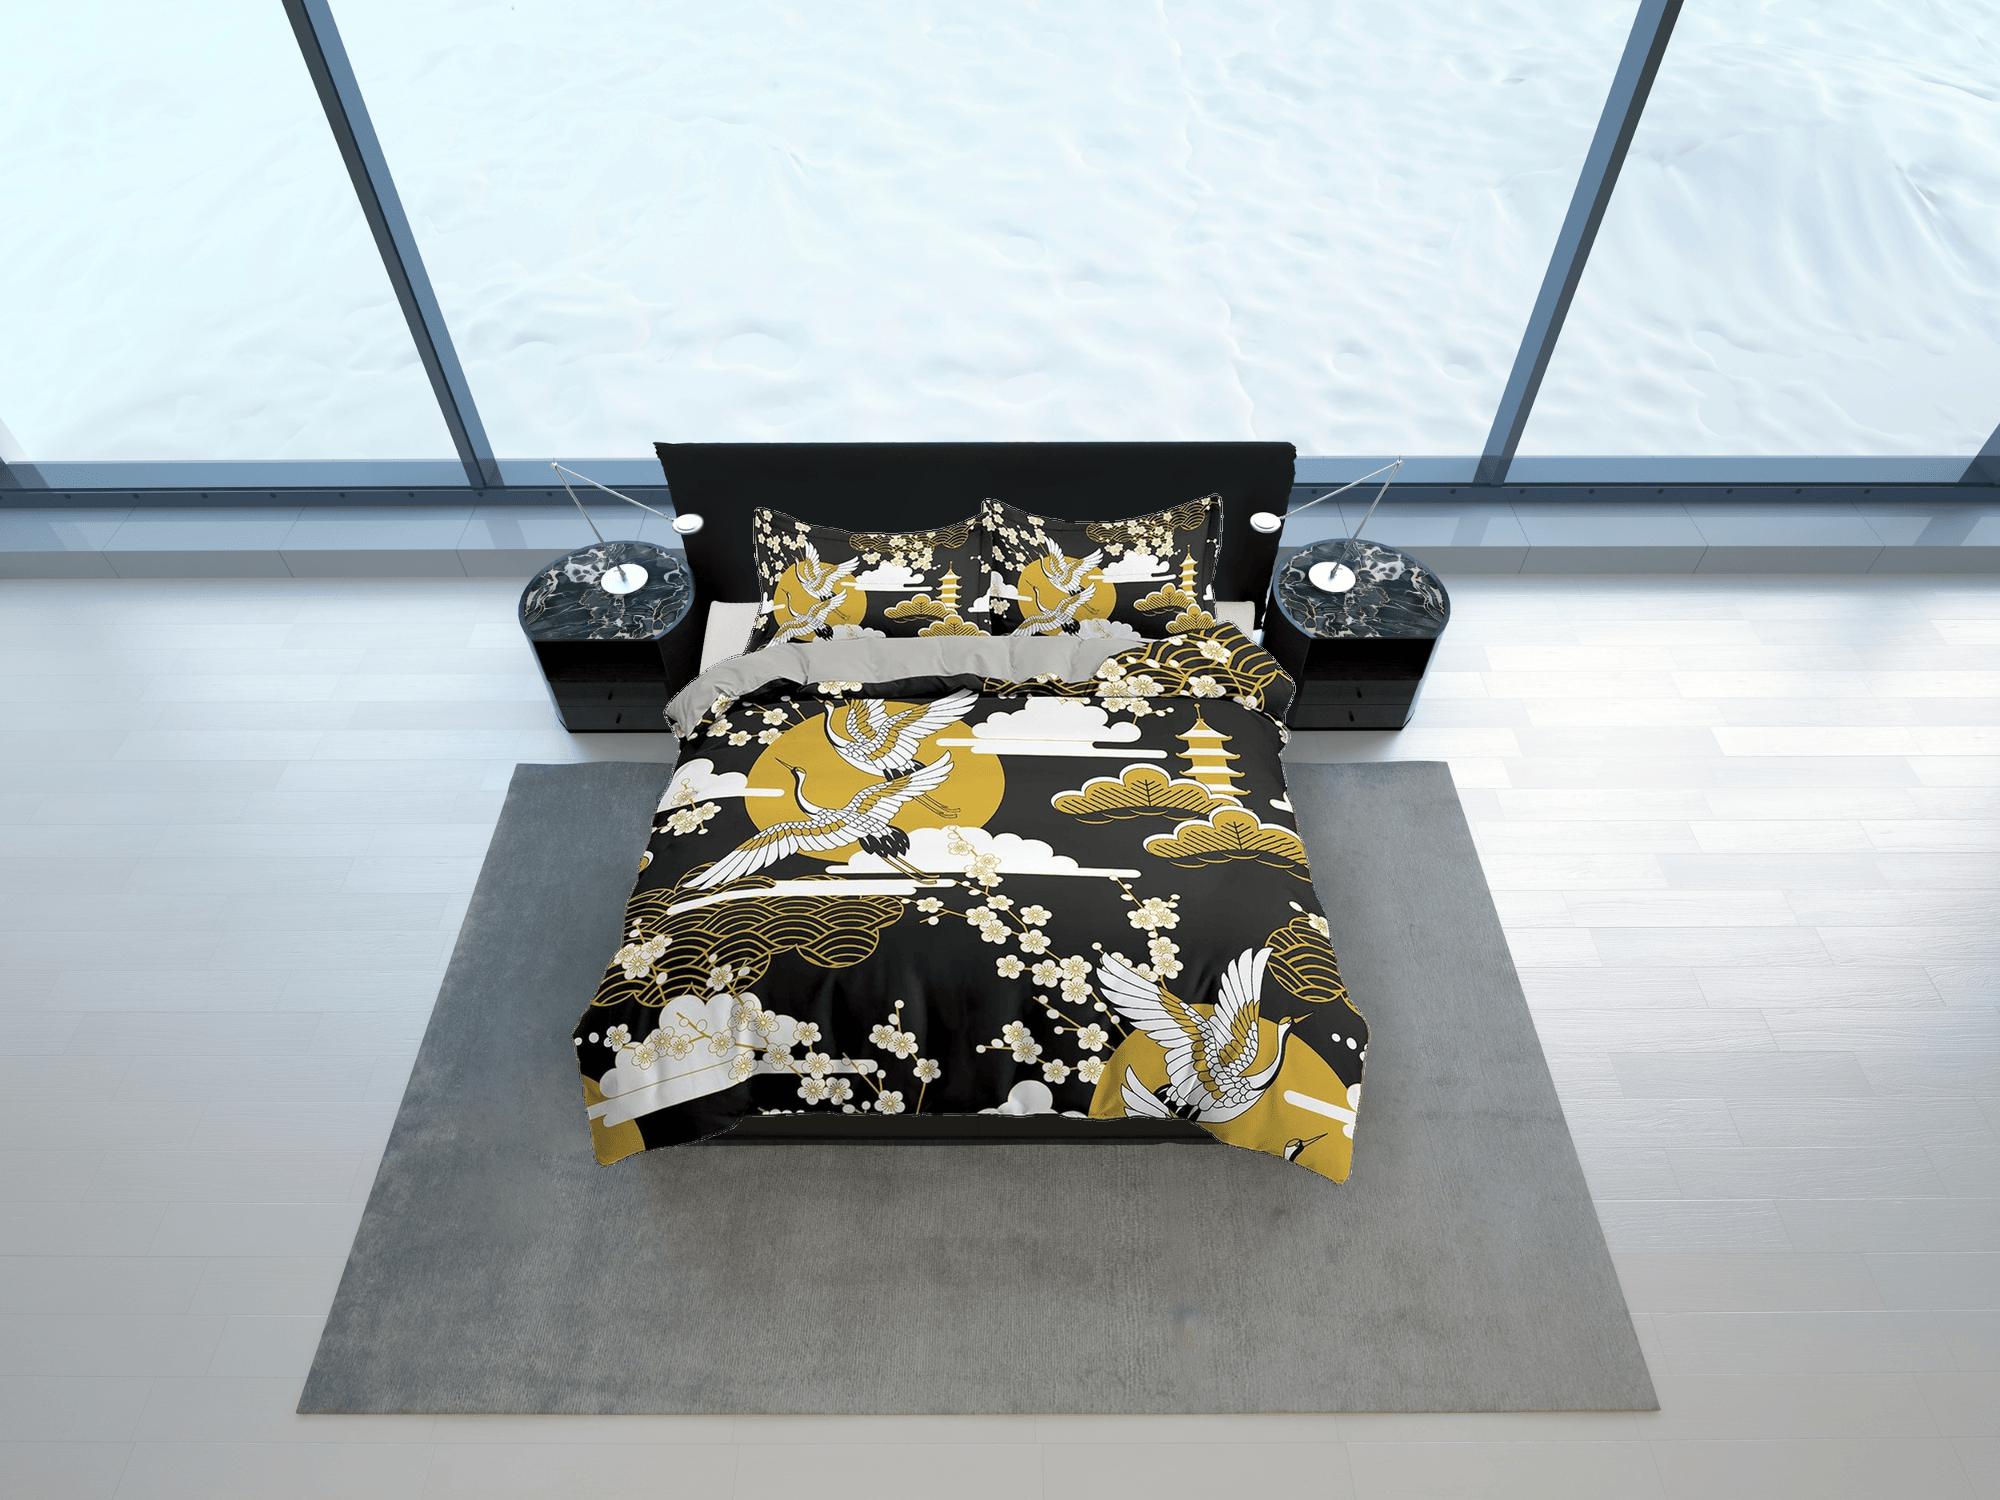 daintyduvet Black oriental bedding, crane bird and cherry blossom prints on Japanese style duvet cover set for king, queen, full, twin, single bed